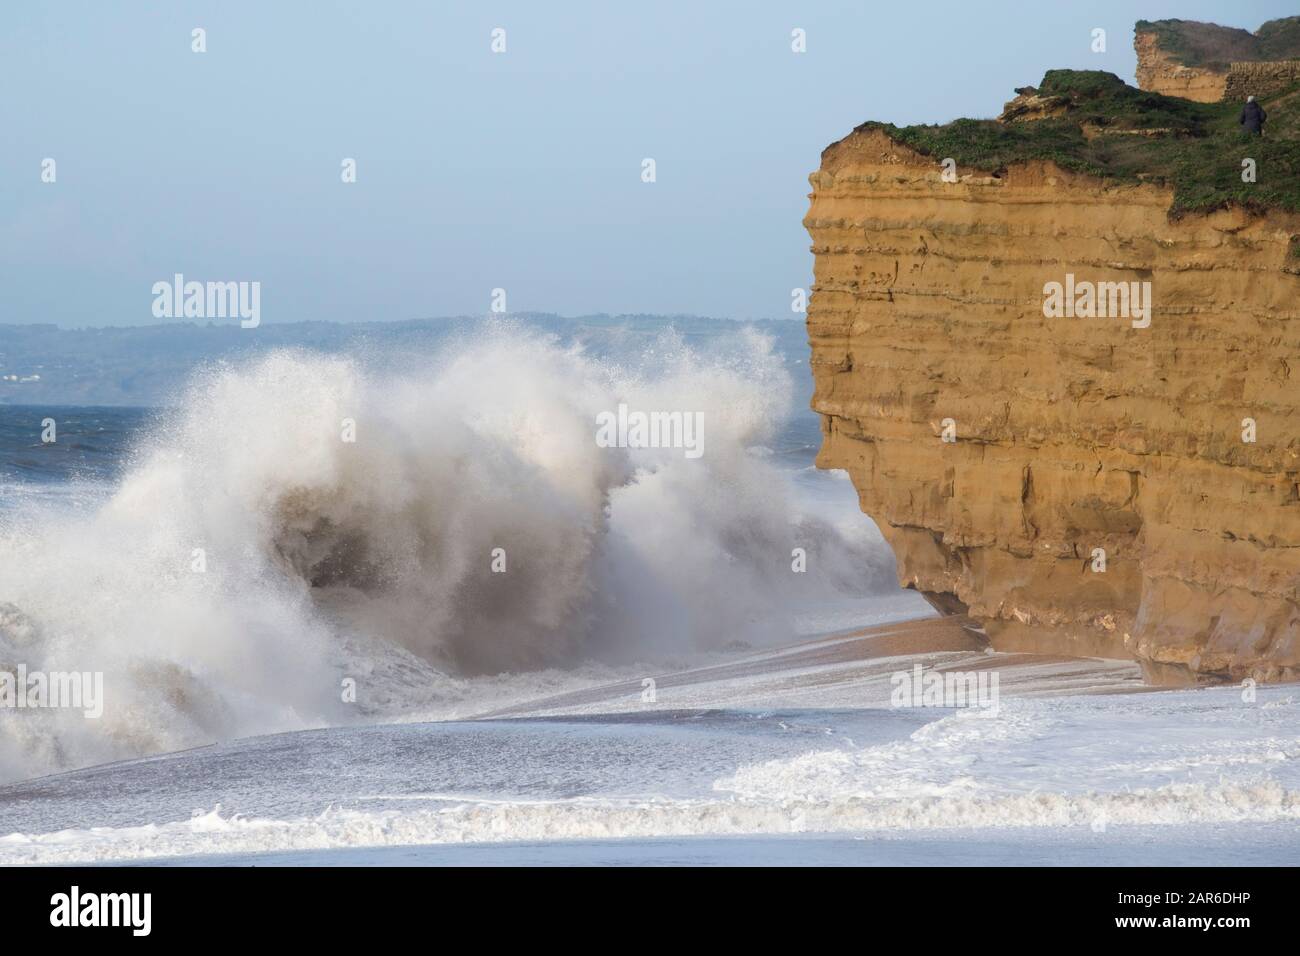 High white breakers from a Channel storm pounding and eroding the beach and sandstone cliffs on Hive Beach, near West Bay, Dorset, January Stock Photo